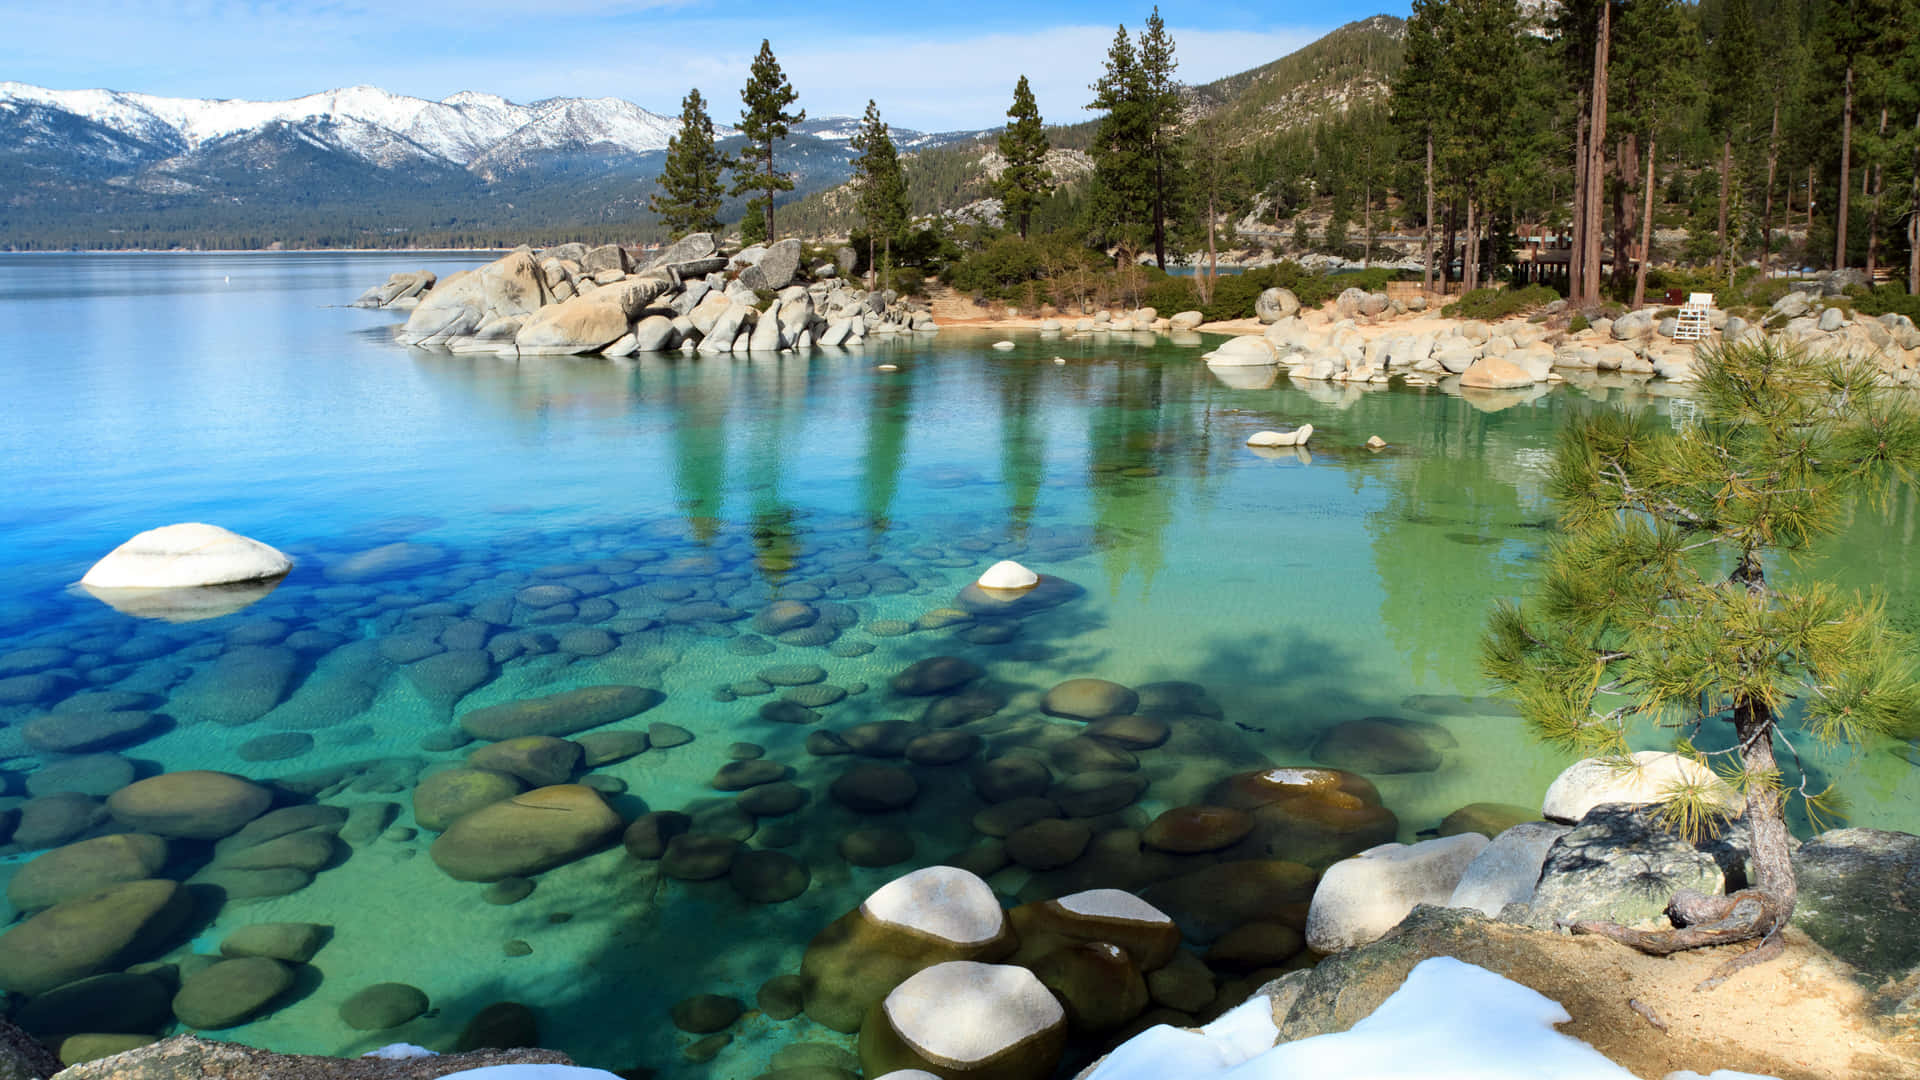 "#FantasticView - The Crystal Clear Blue Waters of Lake Tahoe, California" Wallpaper